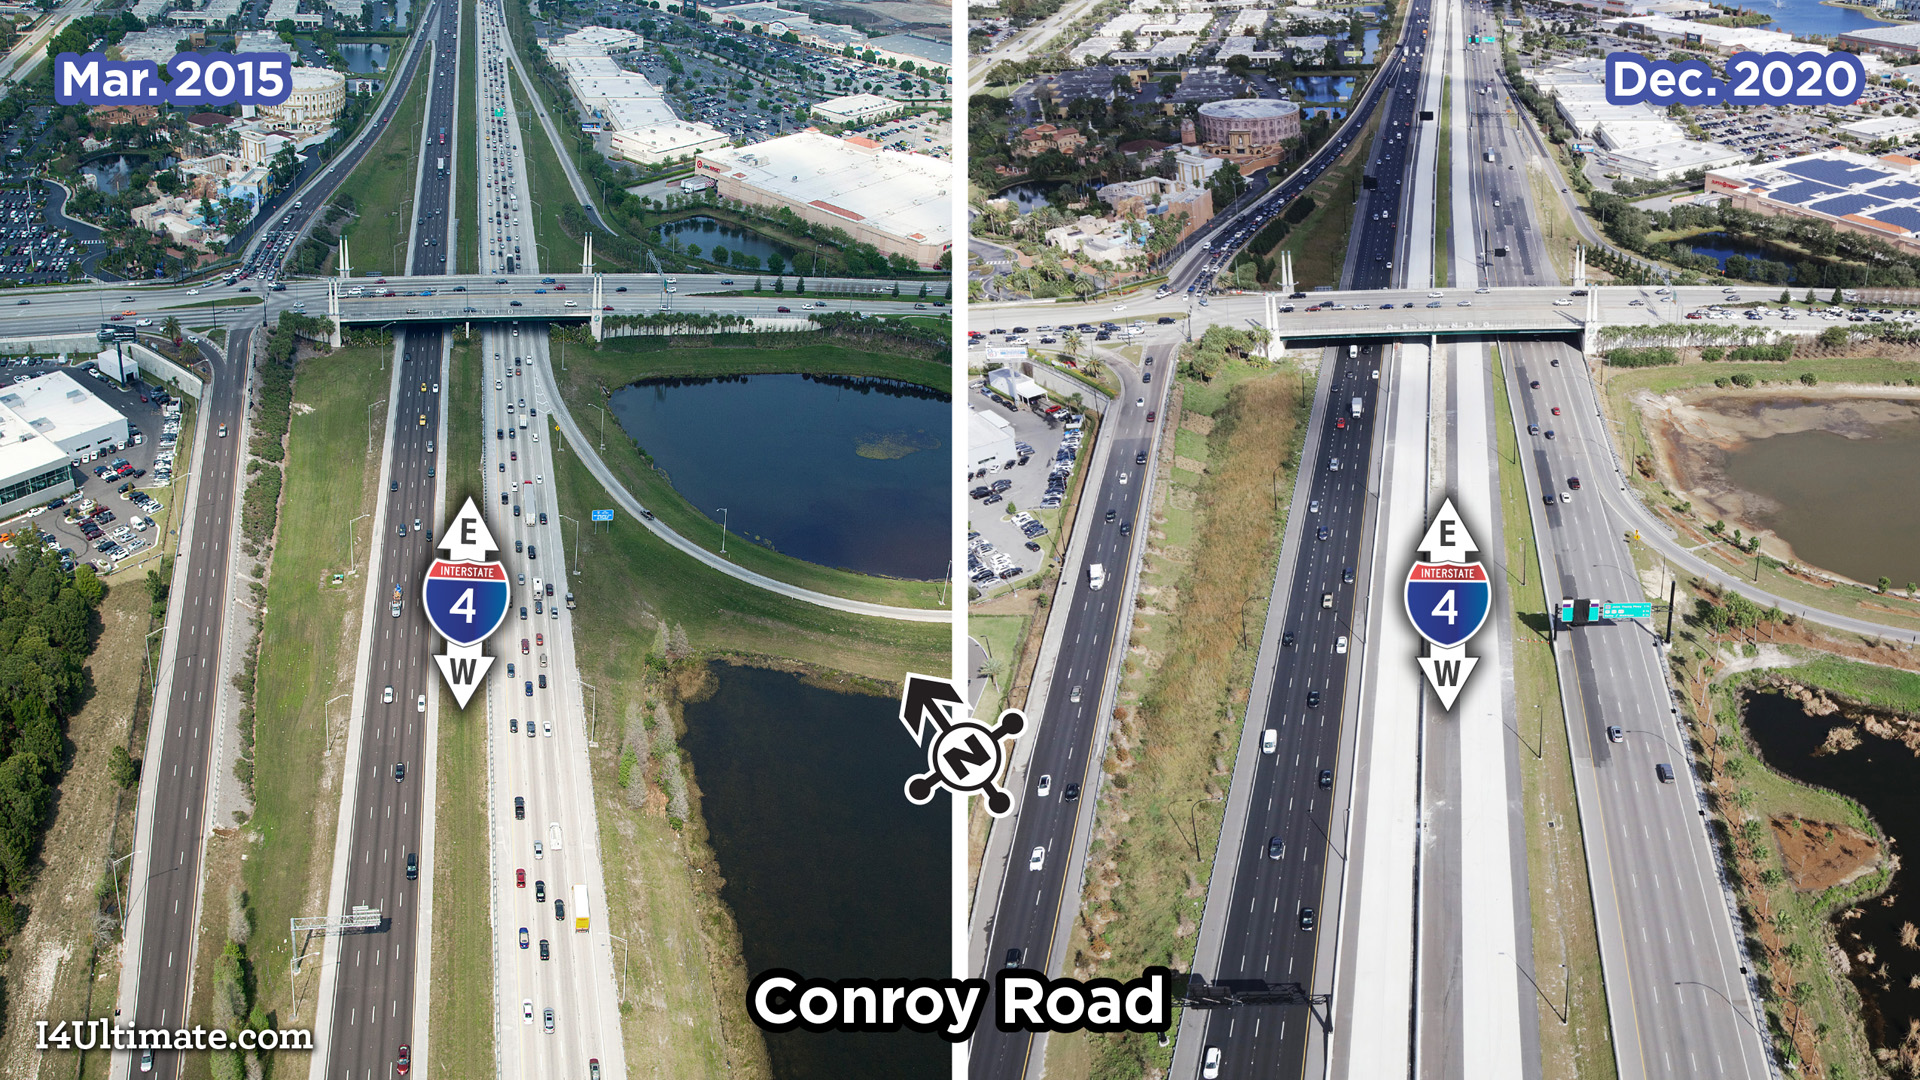 4738-I4Ultimate-GUL-campaign-images-20210212-05-Conroy-Road